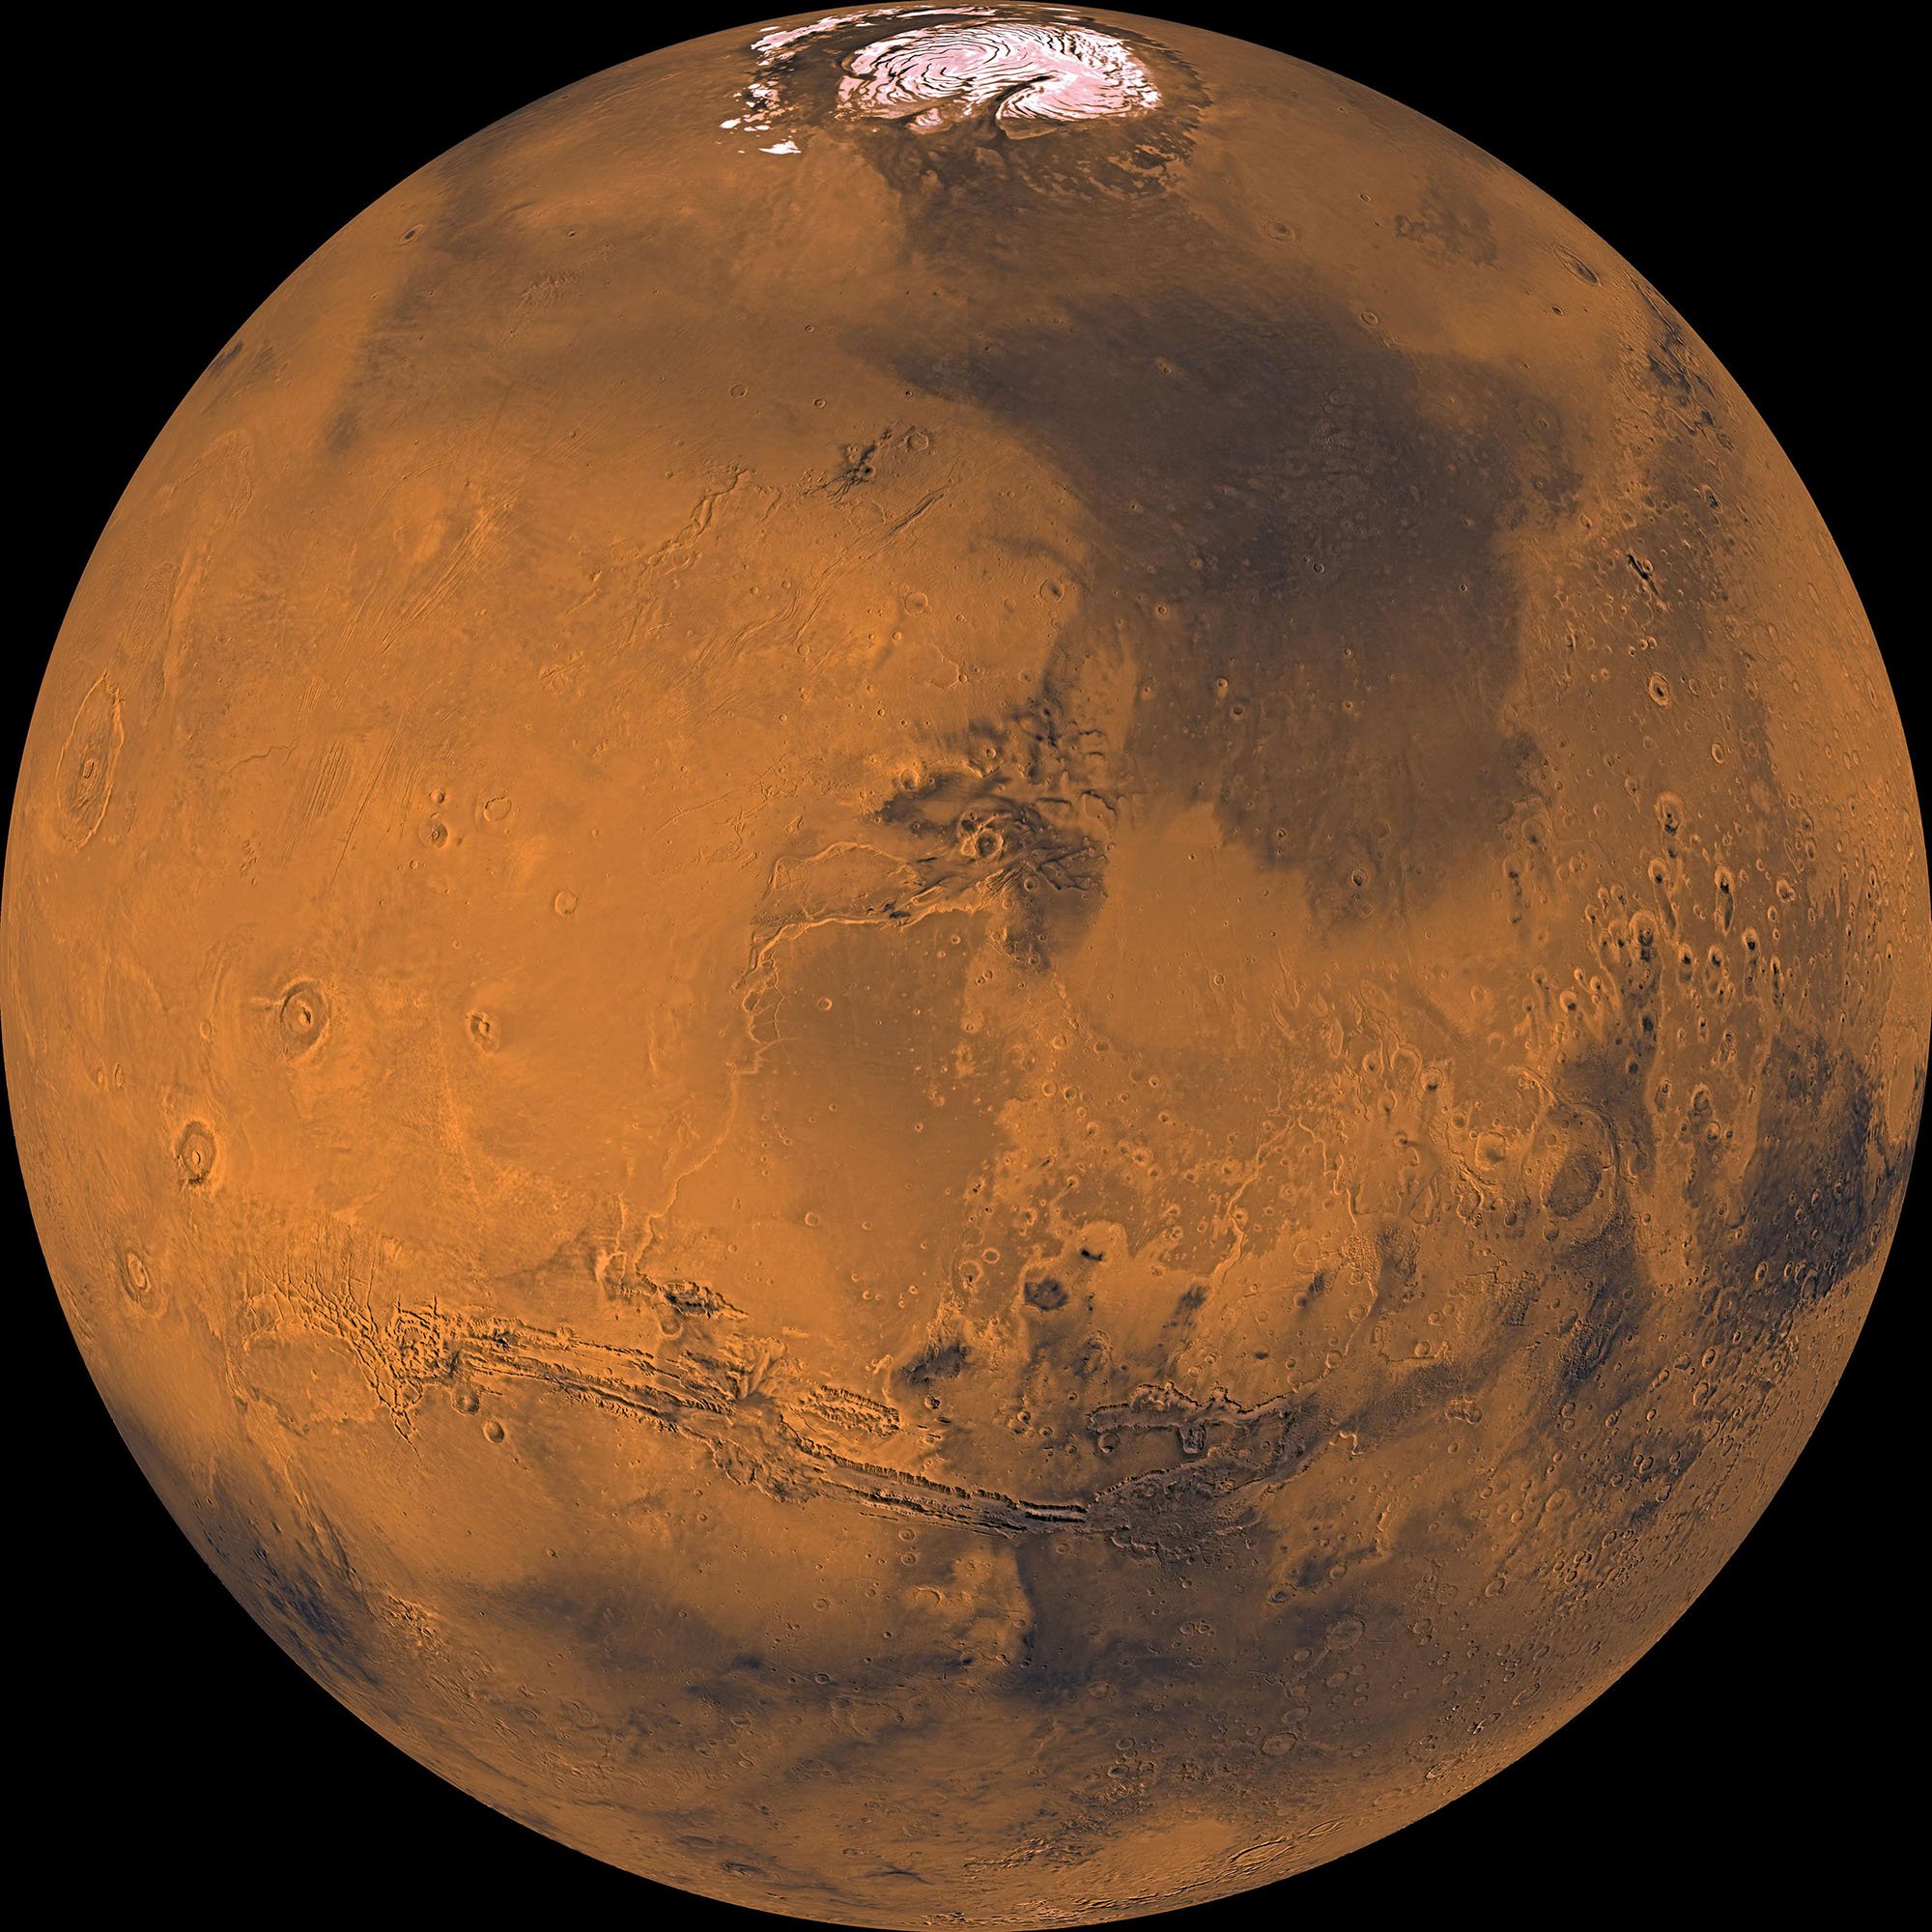 A detailed look at the planet Mars, as seen by NASA's Viking Orbiter.  Olympus Mons and three smaller volcanoes are visible alongside Mariner Valley and the northern ice cap.